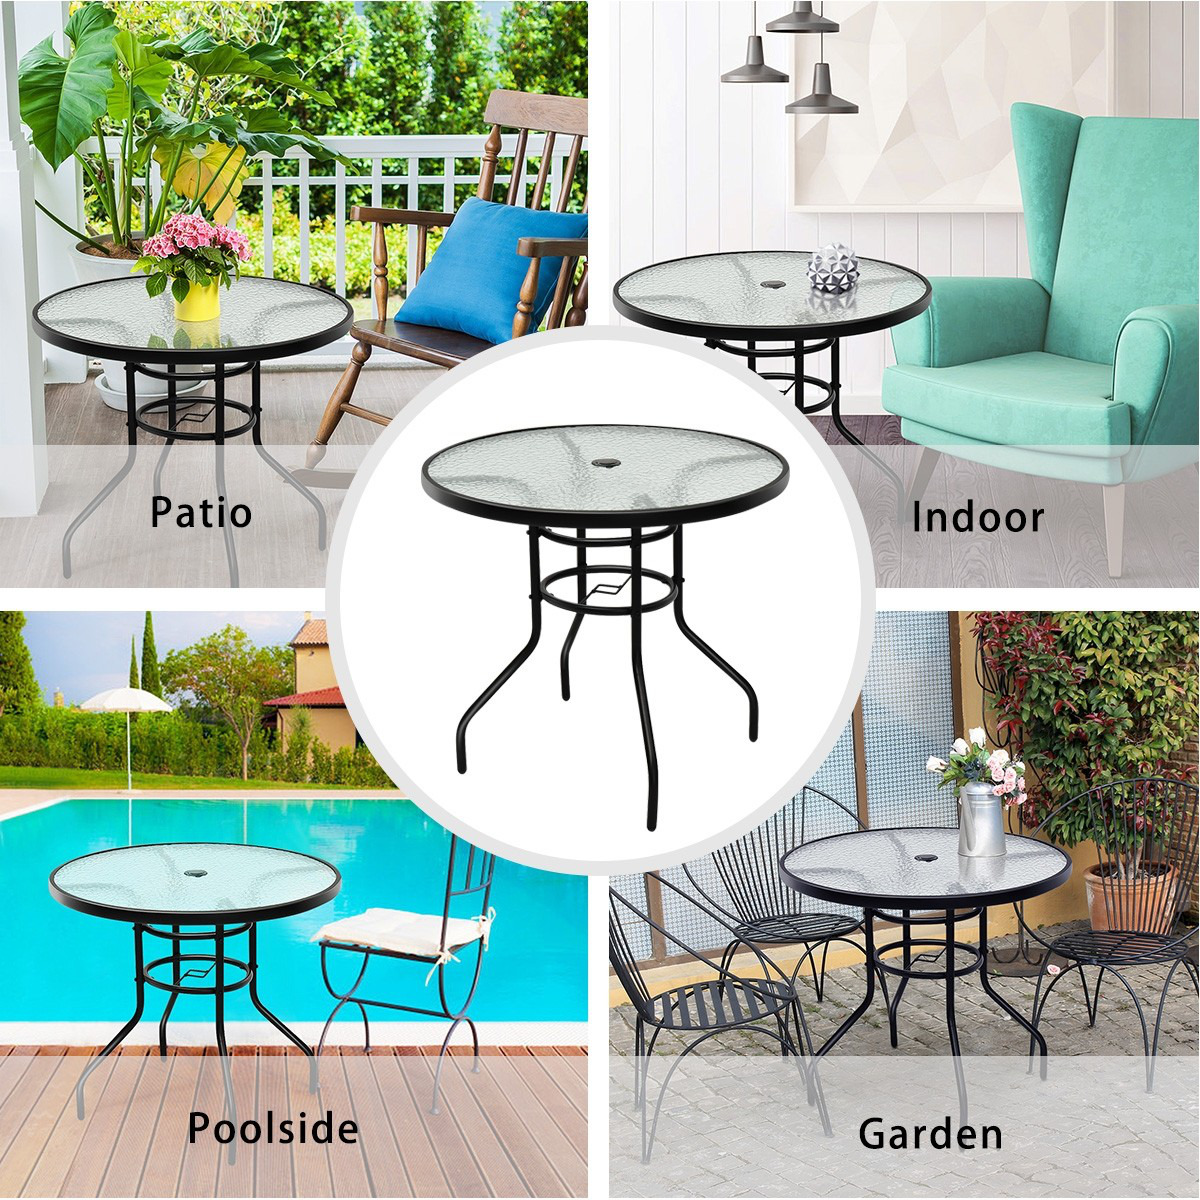 Goorabbit Outdoor Glass Table 32" Outdoor Bistro Table Patio Dining Table Round Side Table Coffee Table Furniture with Umbrella Hole, Metal Frame Water Ripple Glass Top(Black) - image 2 of 8